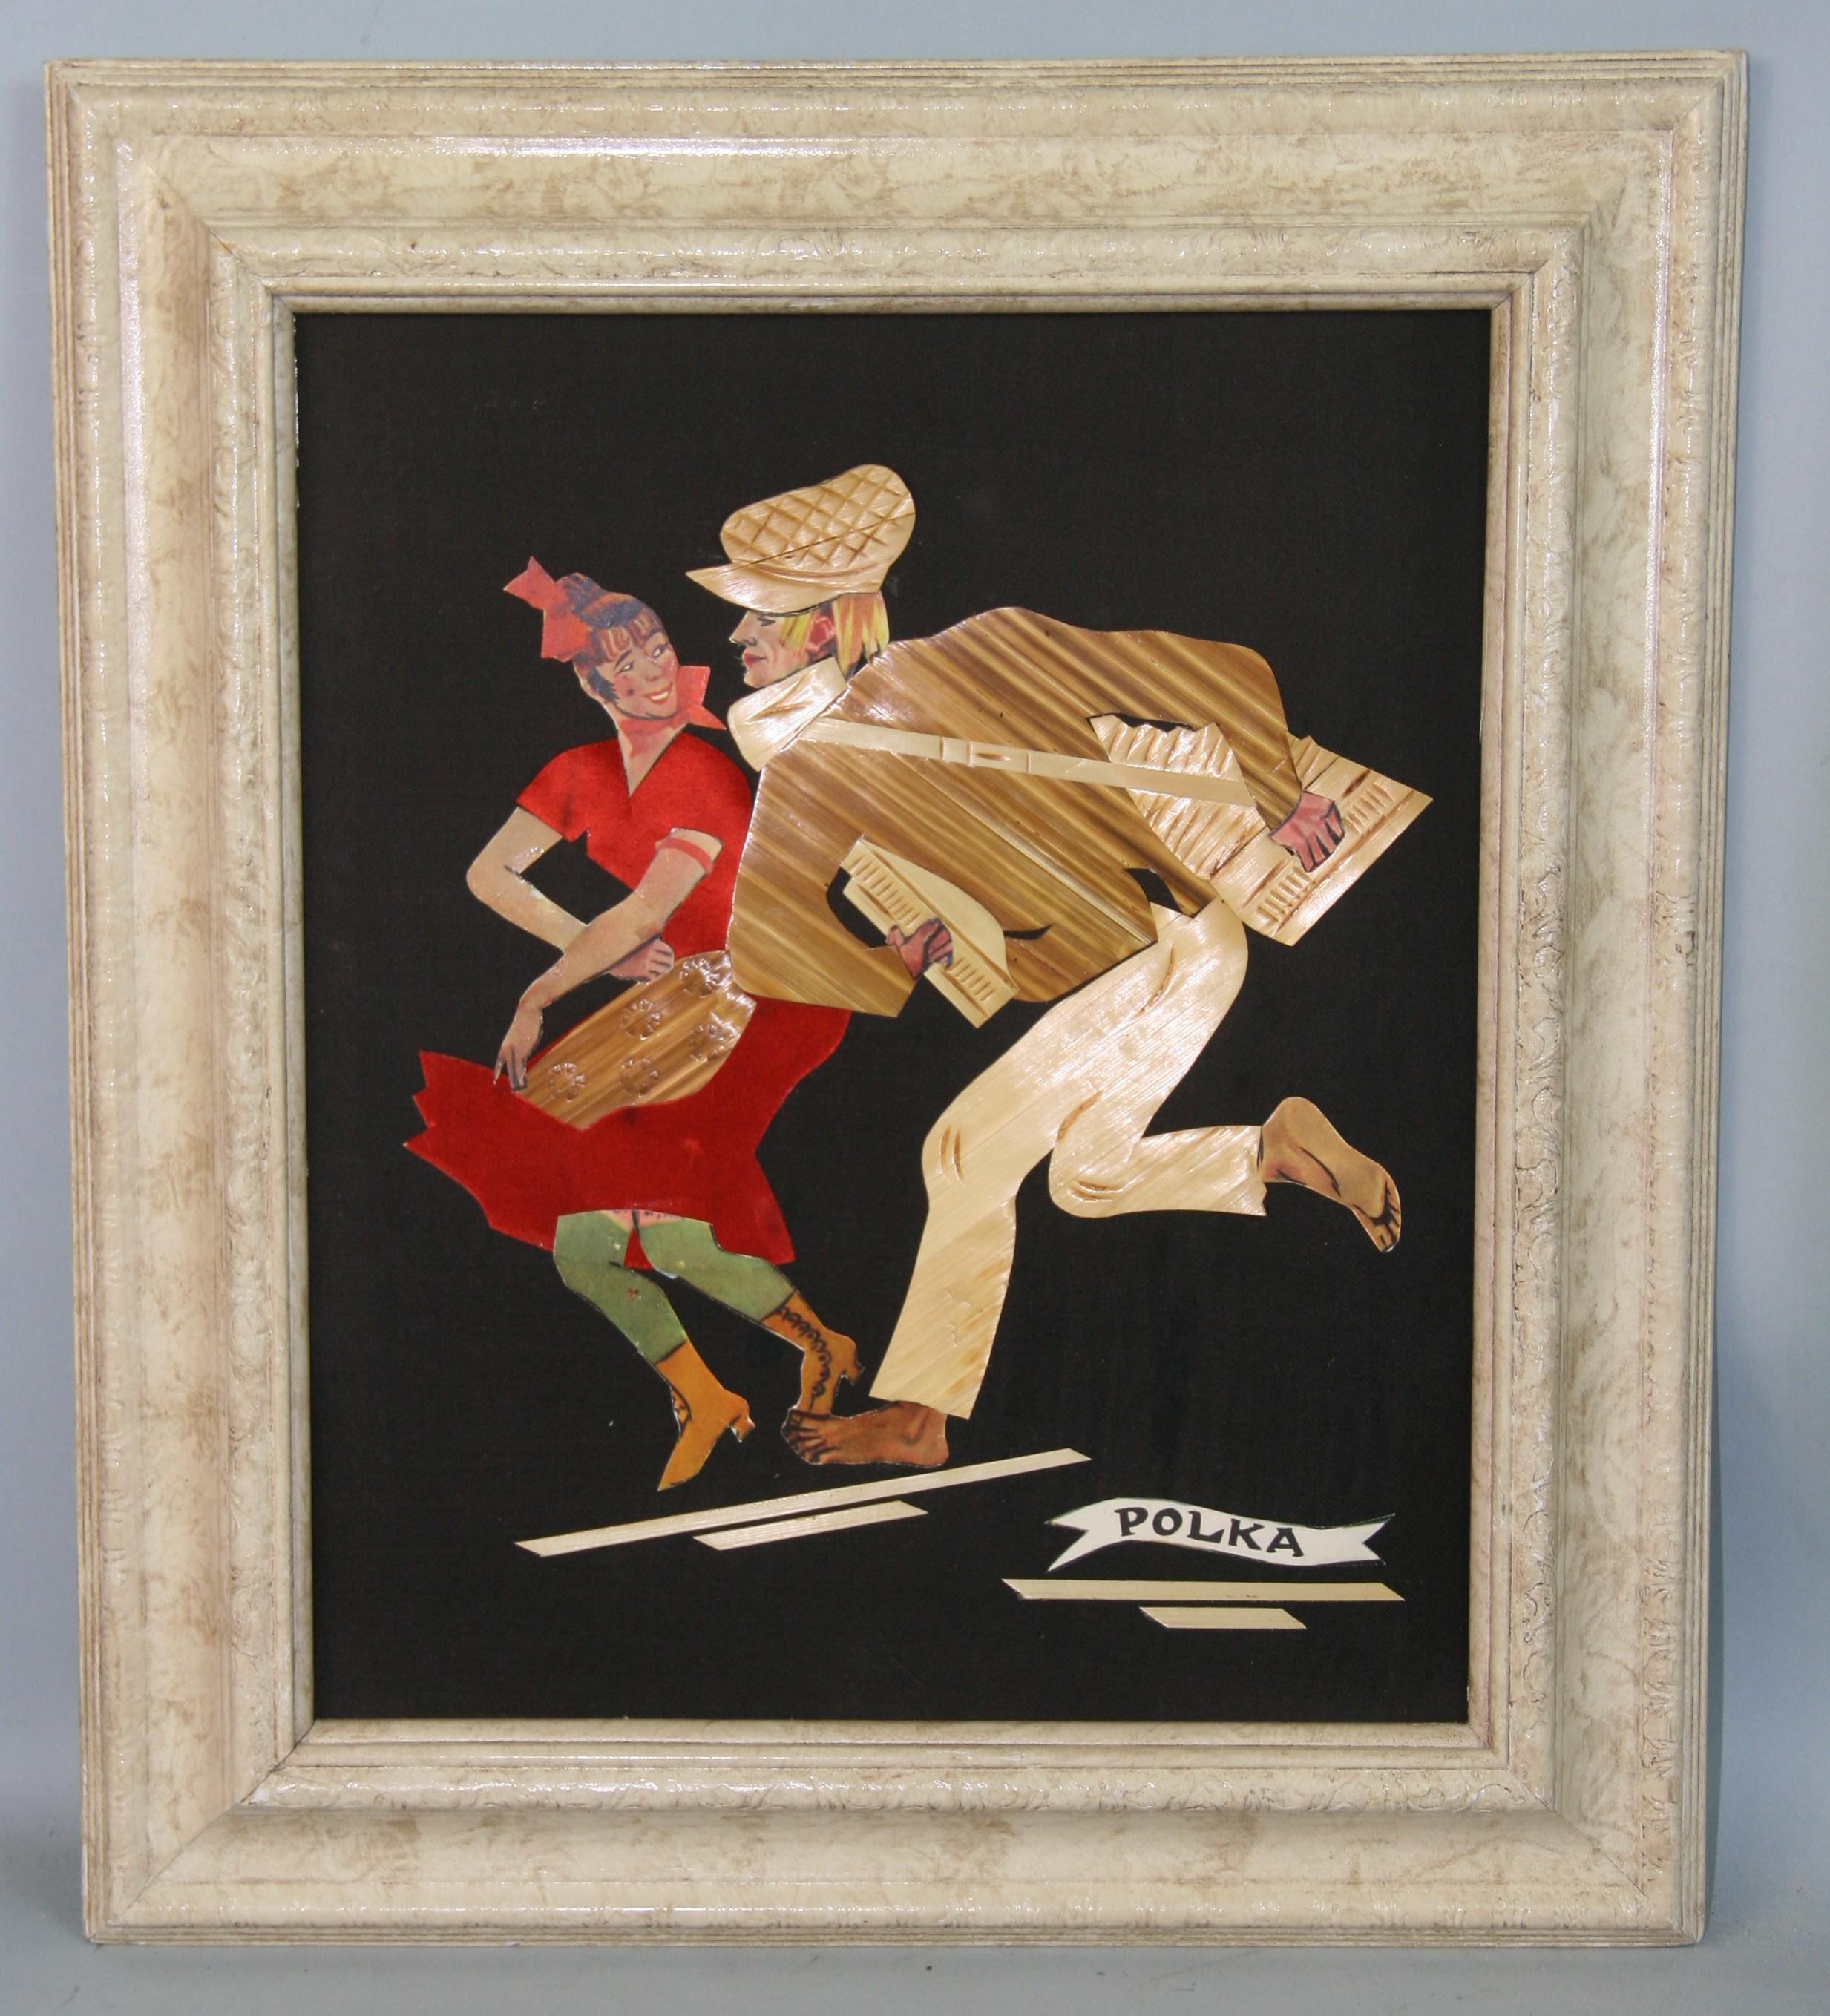 Vintage Polish Collage Dance "The Polka Folk Dancers" - Mixed Media Art by Unknown